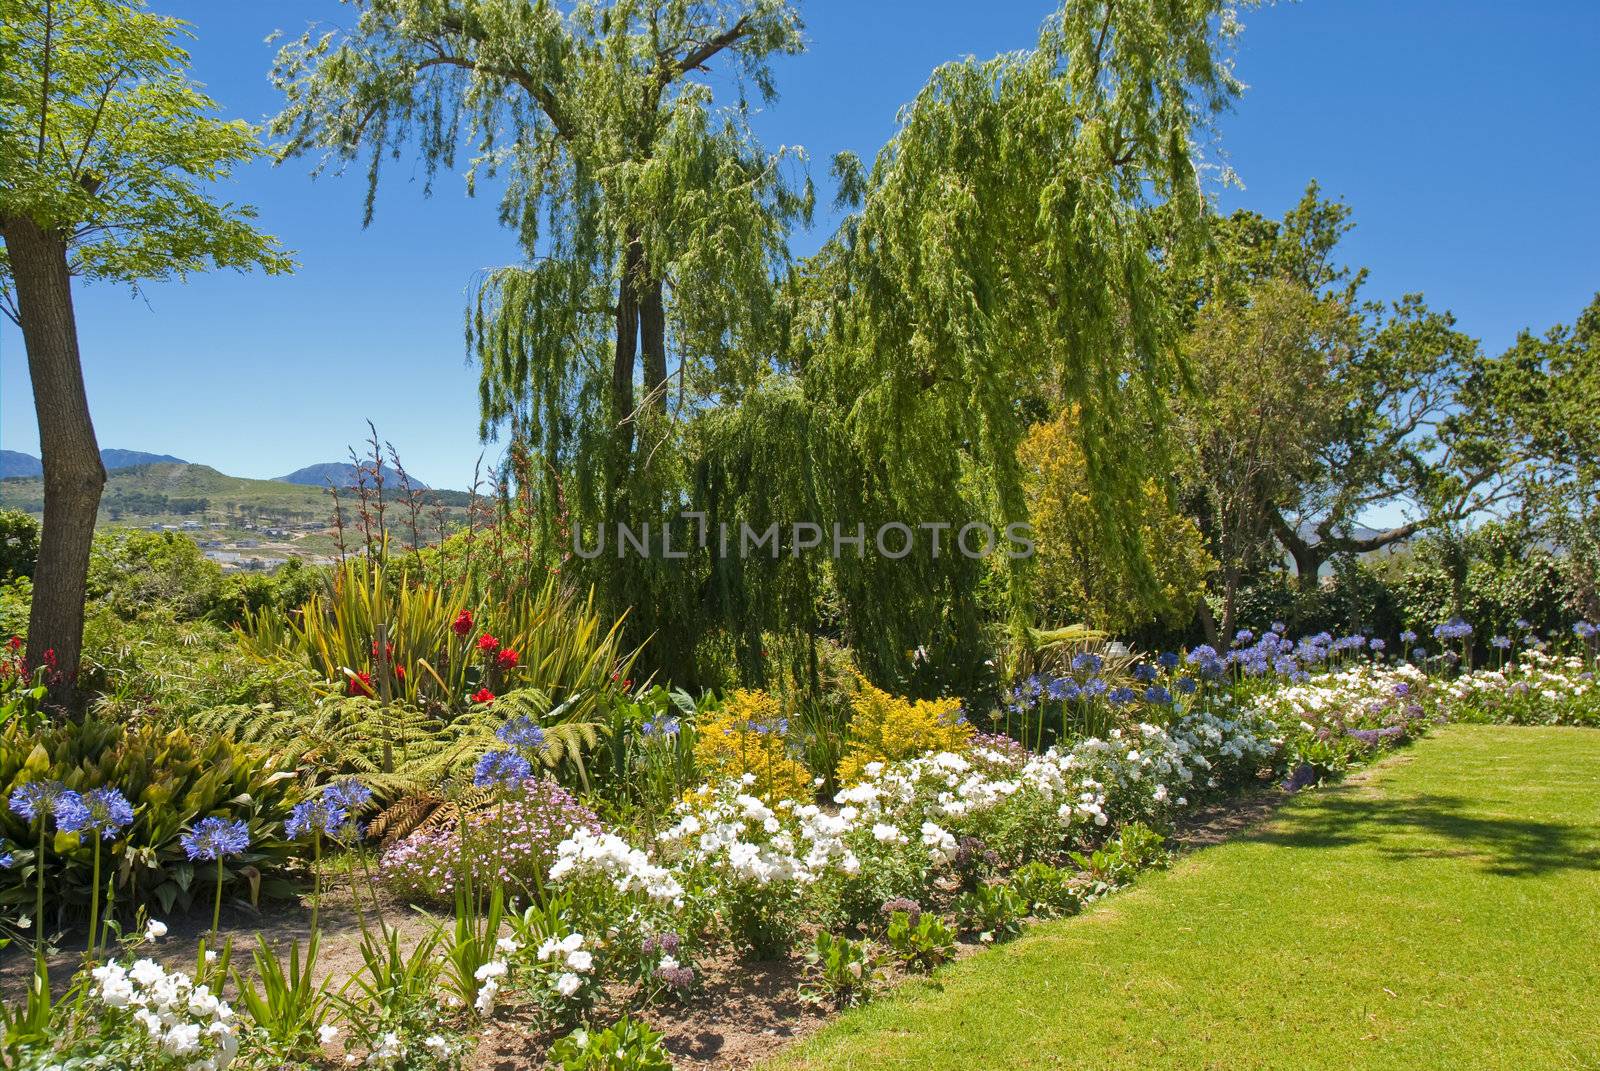 Colourful garden with trees in the background and grass in the foreground